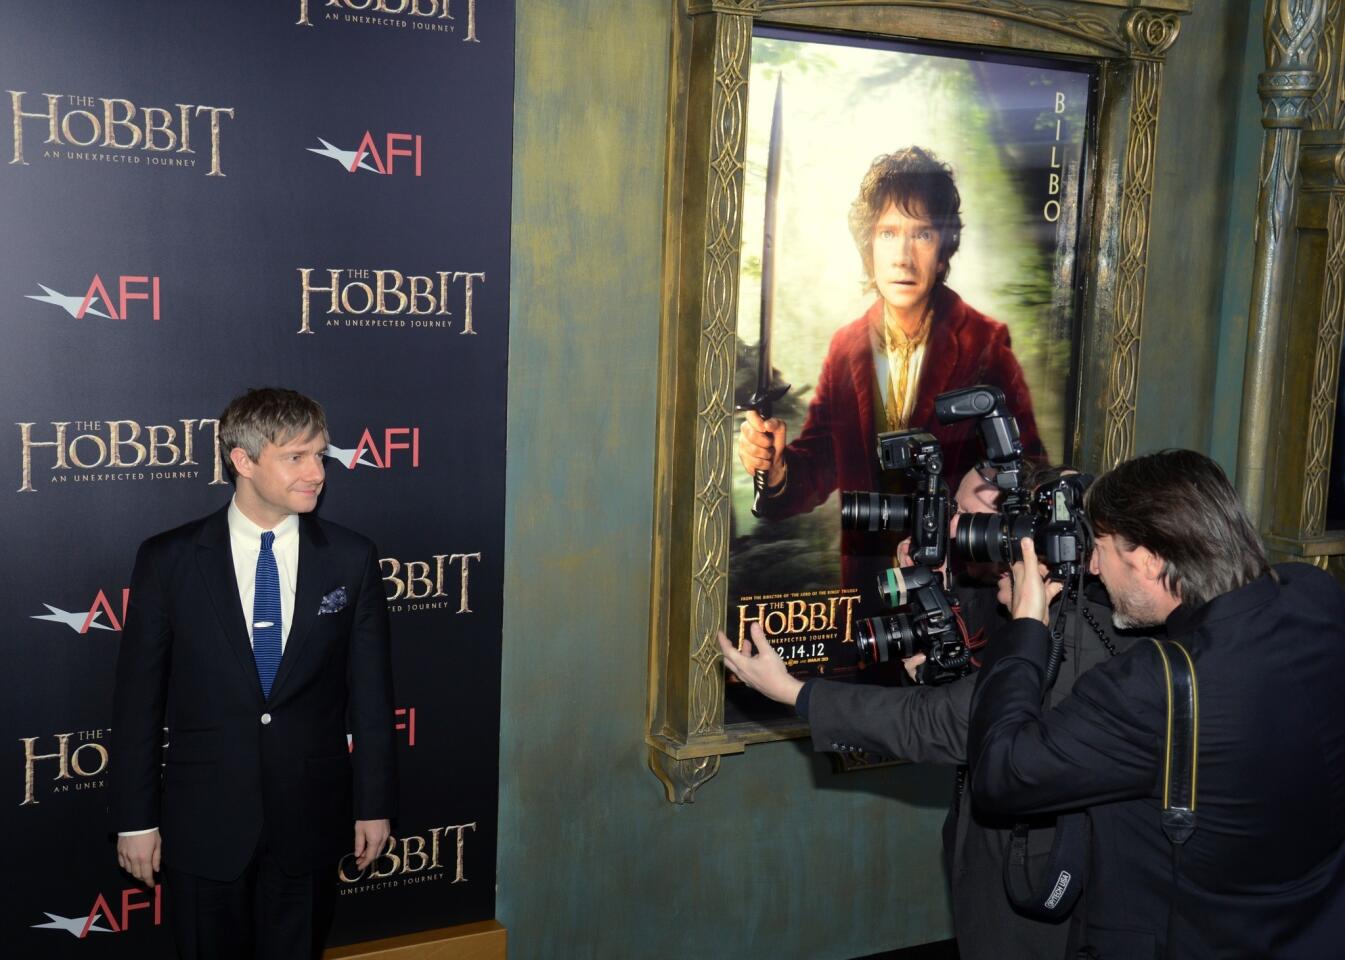 Bilbo Baggins actor Martin Freeman poses for photographers at the New York premiere of "The Hobbit: An Unexpected Journey."